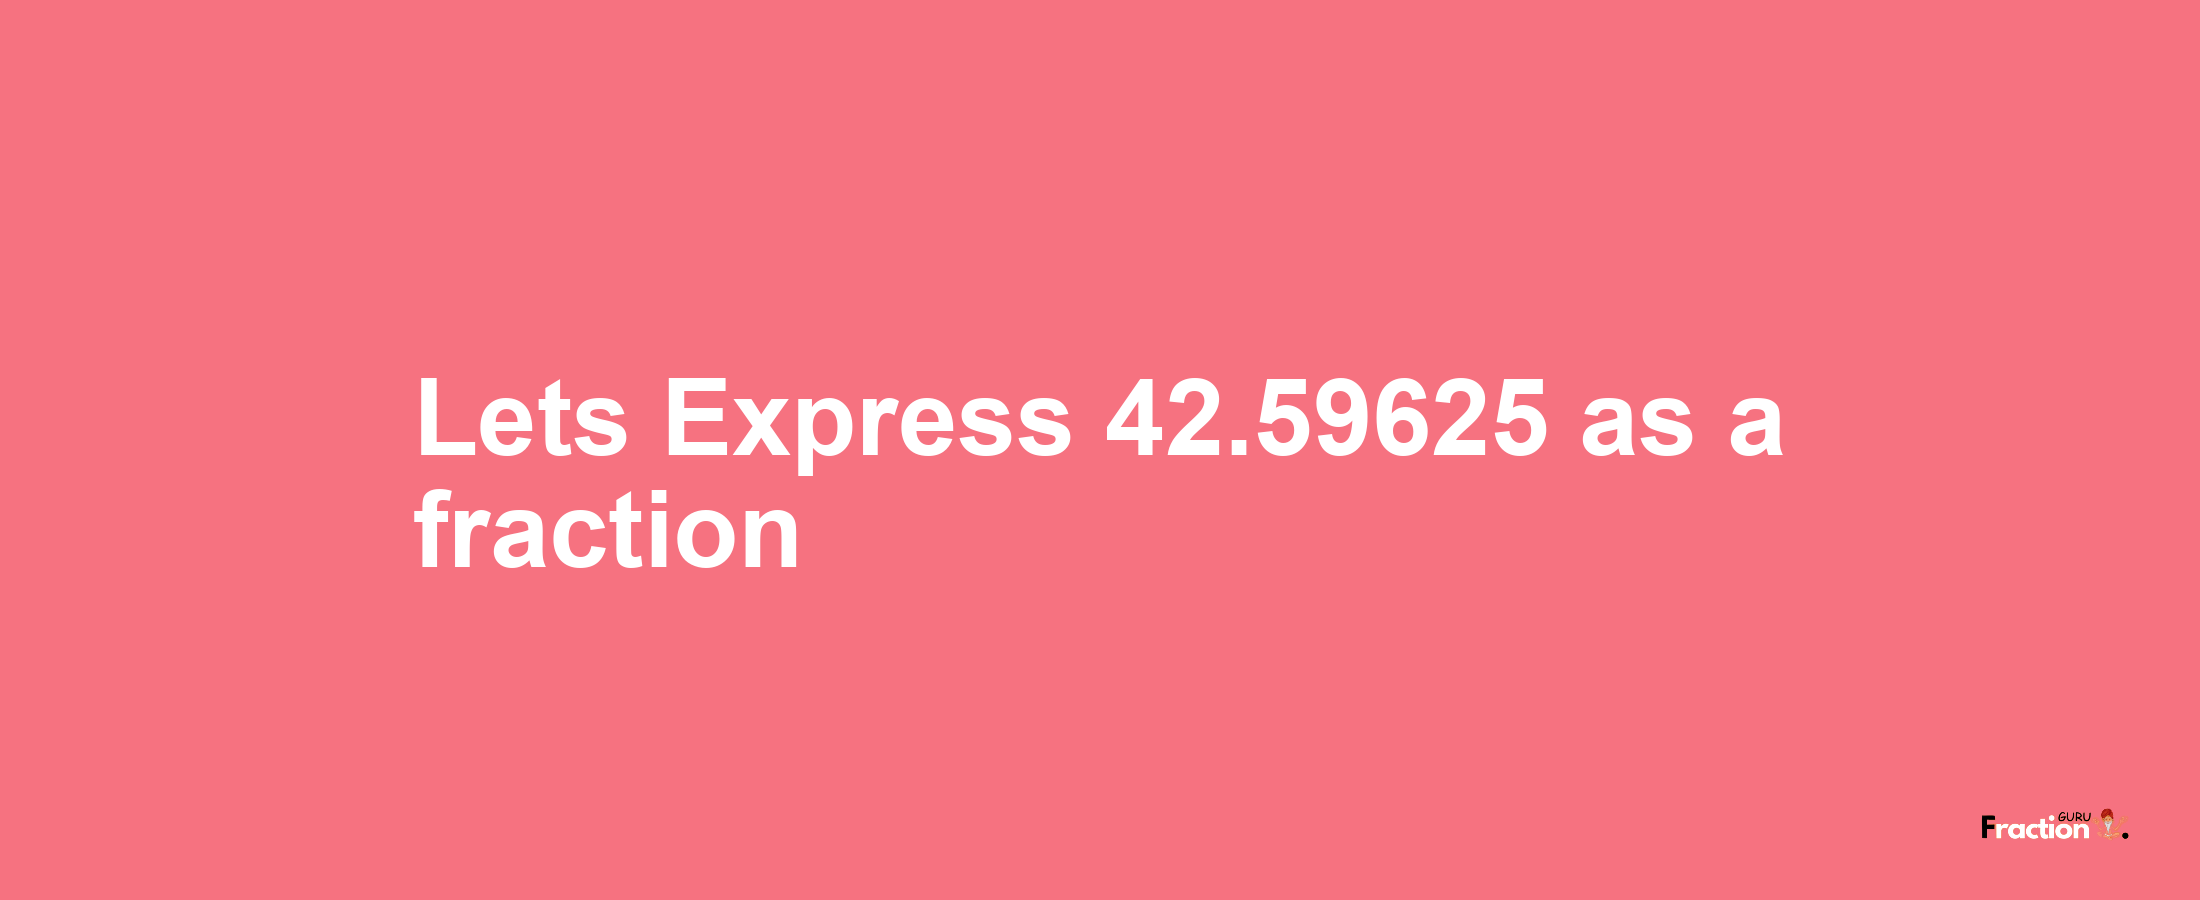 Lets Express 42.59625 as afraction